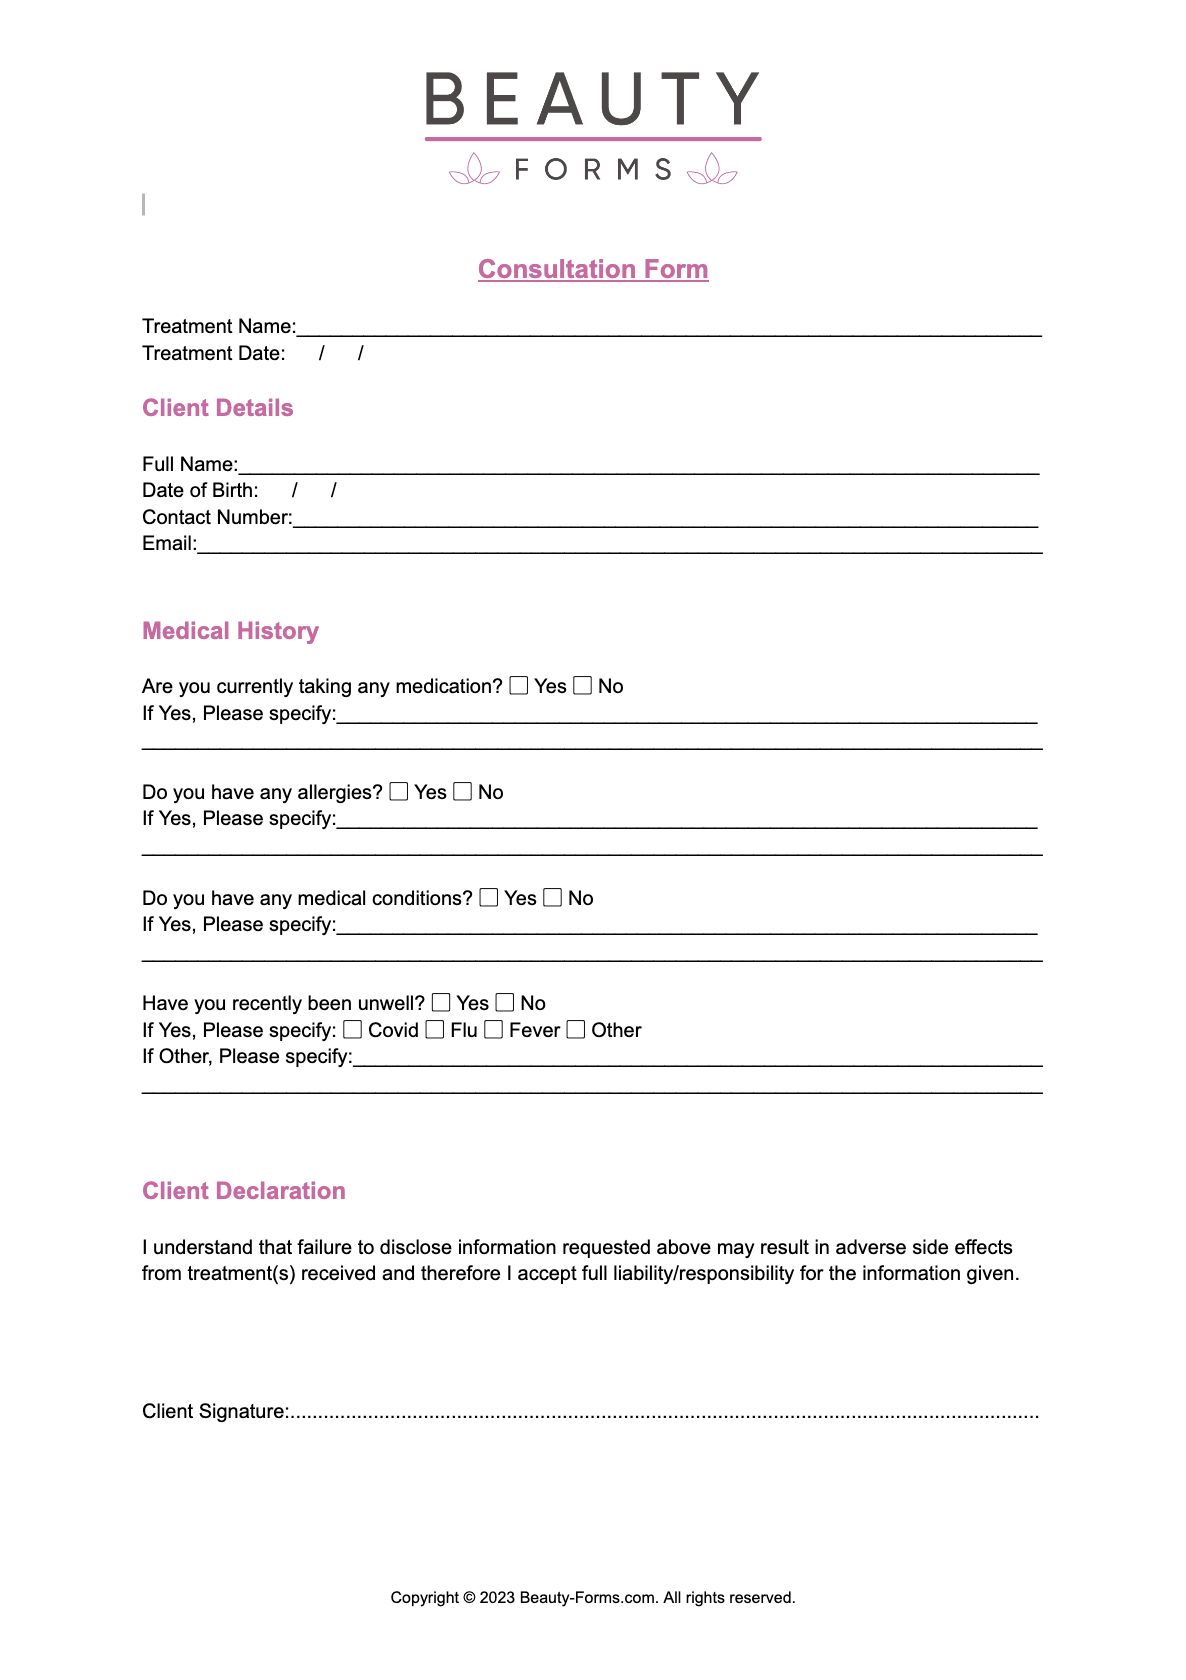 free-beauty-forms-pdf-templates-download-now